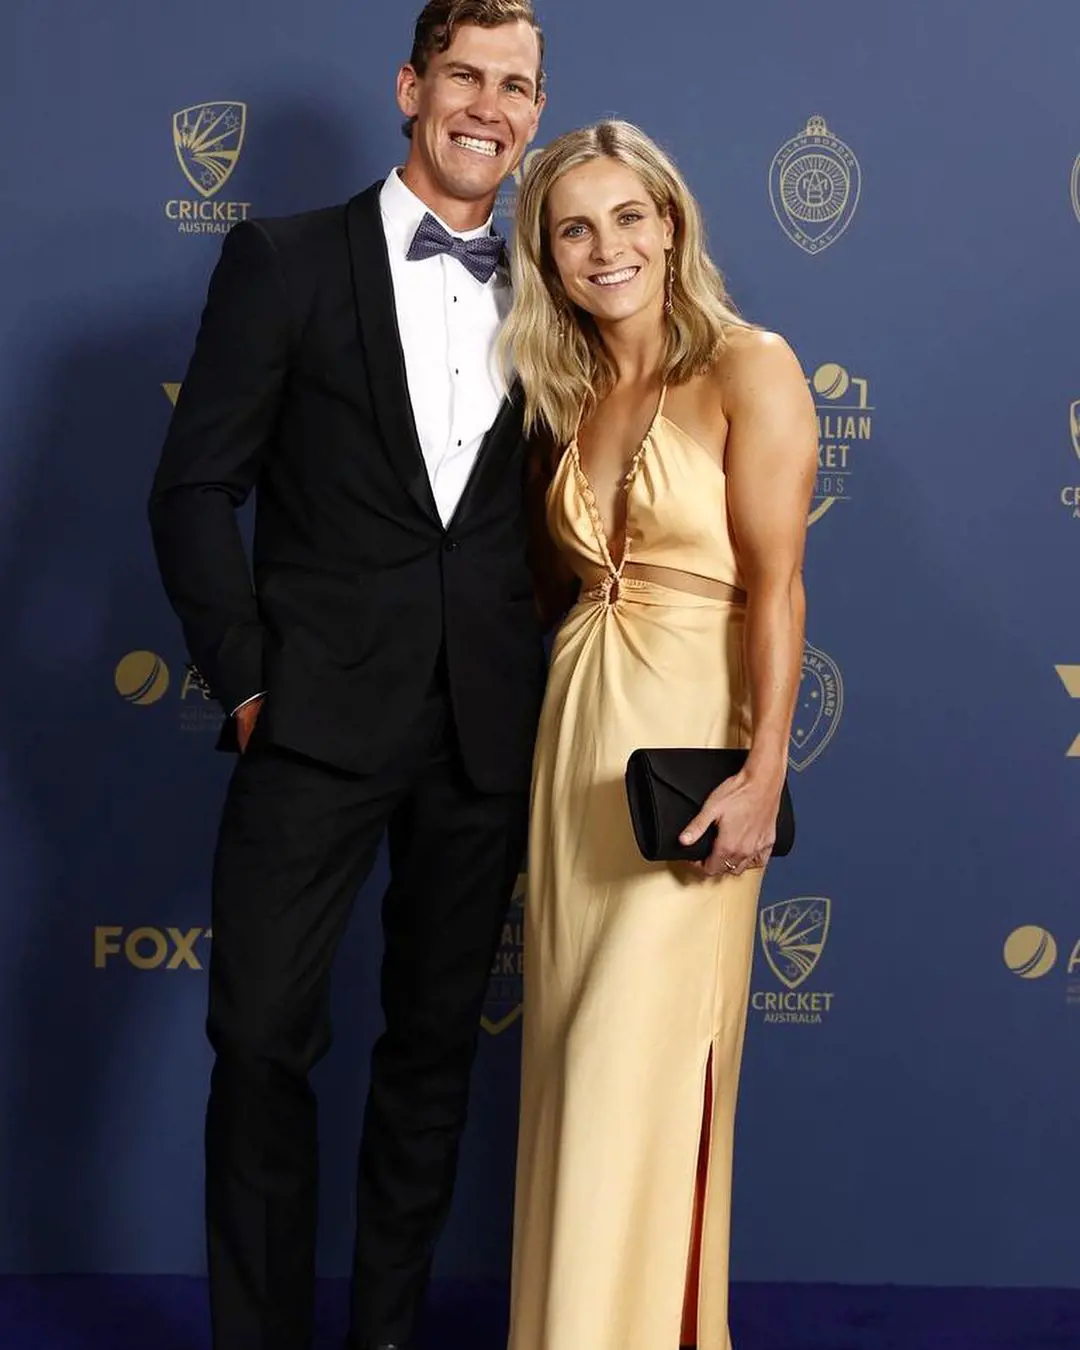 Sophie and Gus attended the Australian cricket award on January 31, 2023 at Randwick Racecourse.